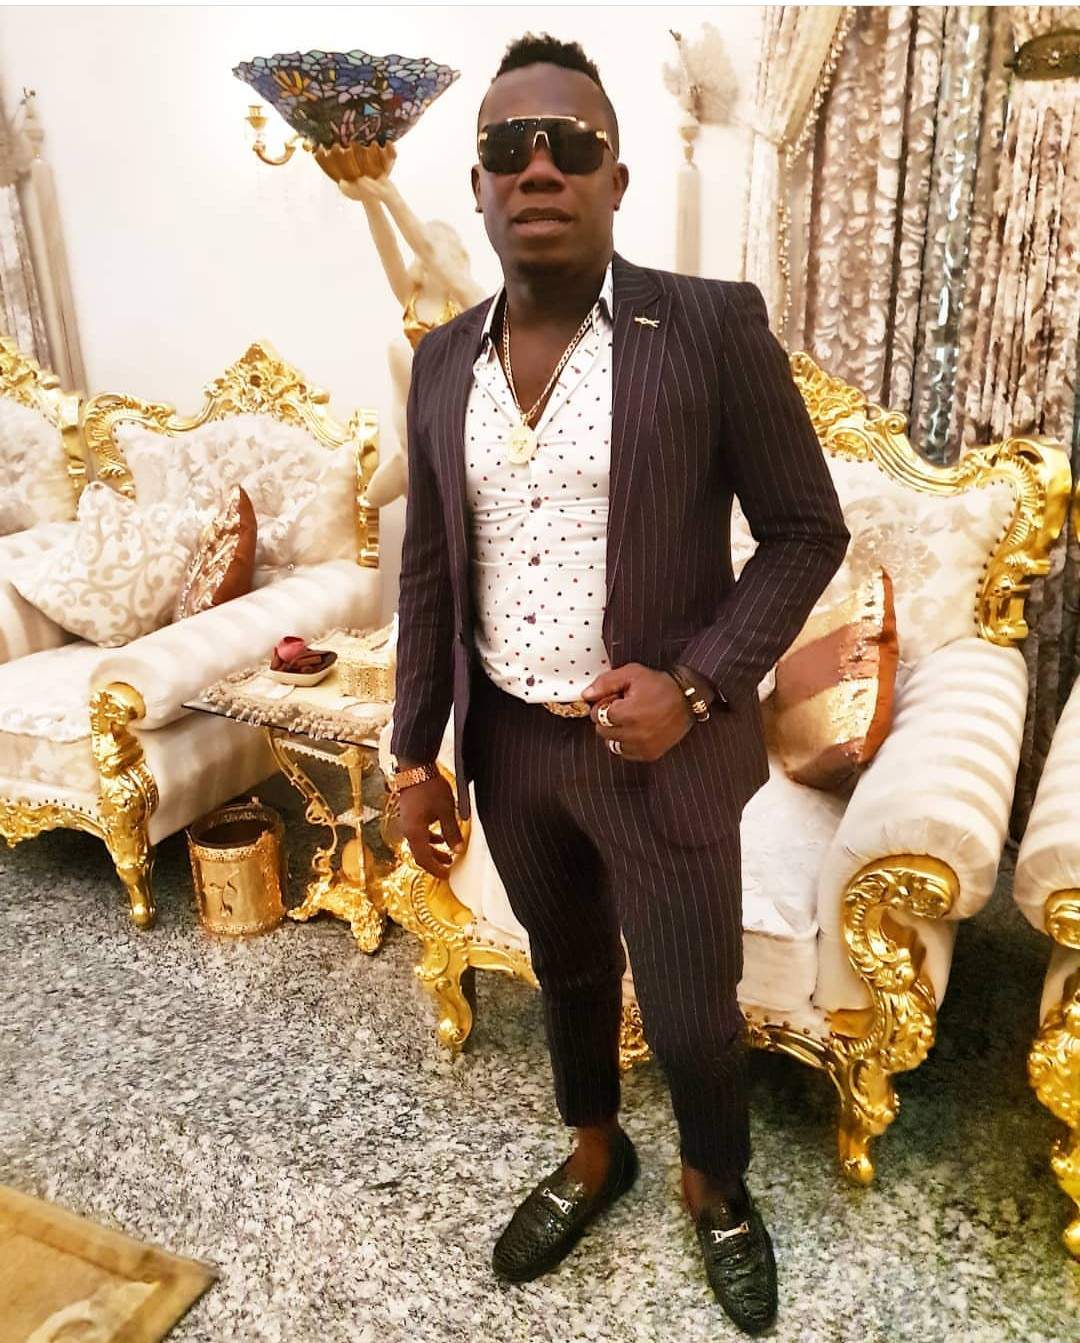 "After enough beating, Imo State Police officers collected 22k dollars cash from me" - Duncan Mighty speaks on his arrest